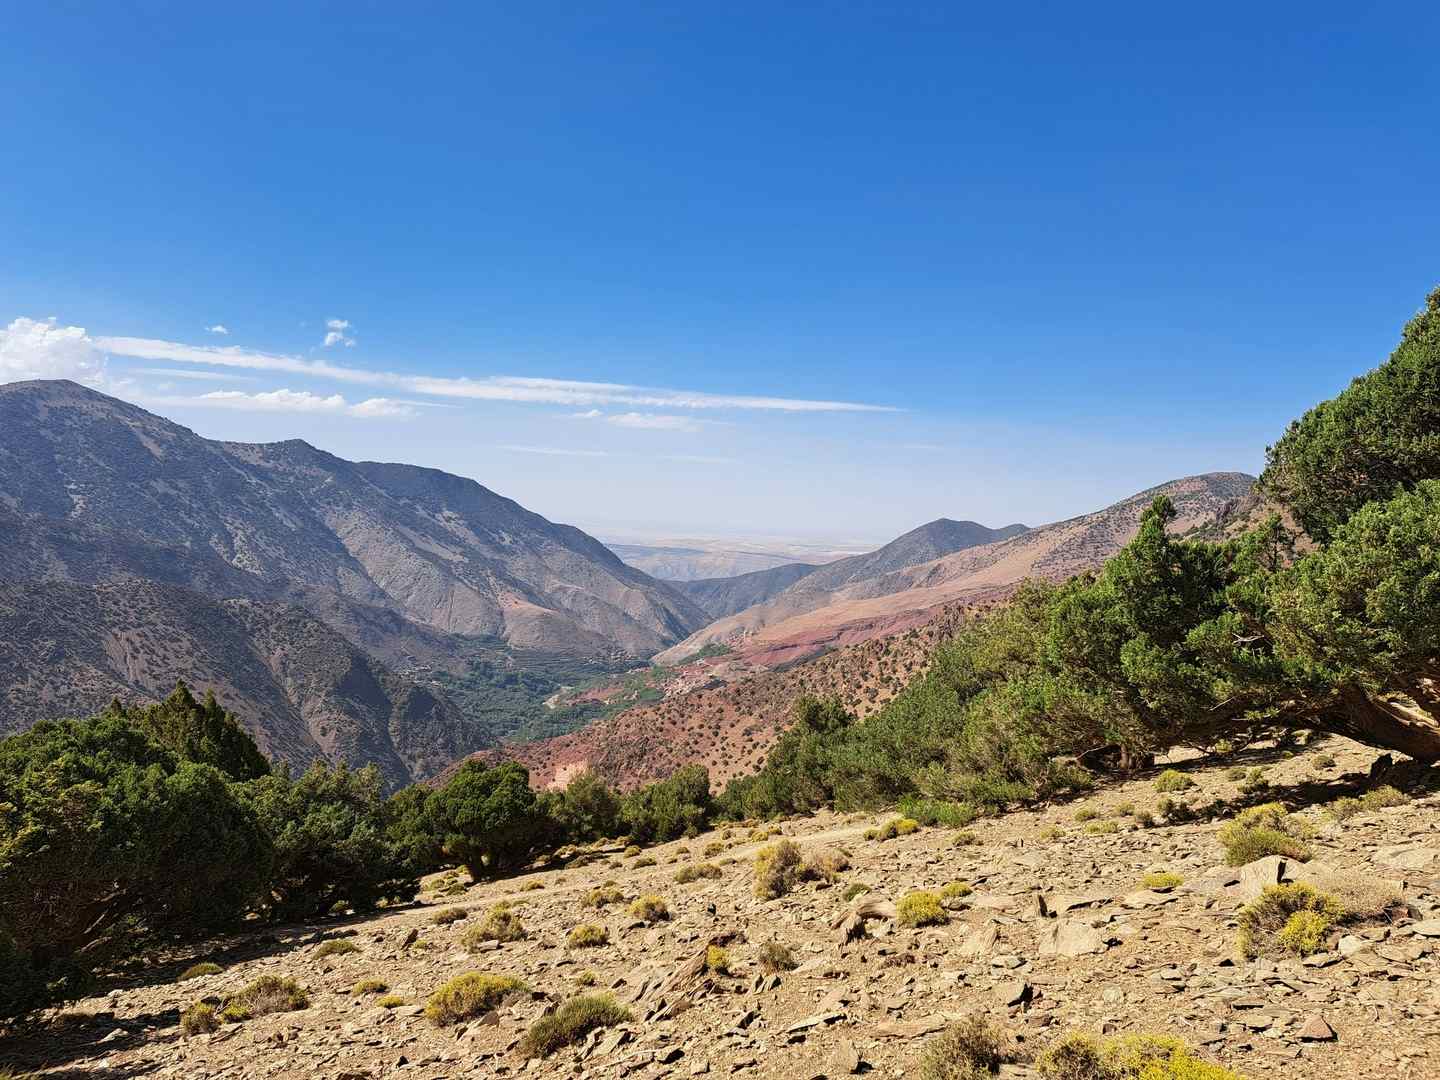 I went on the mount Toubkal trip in Septemb...